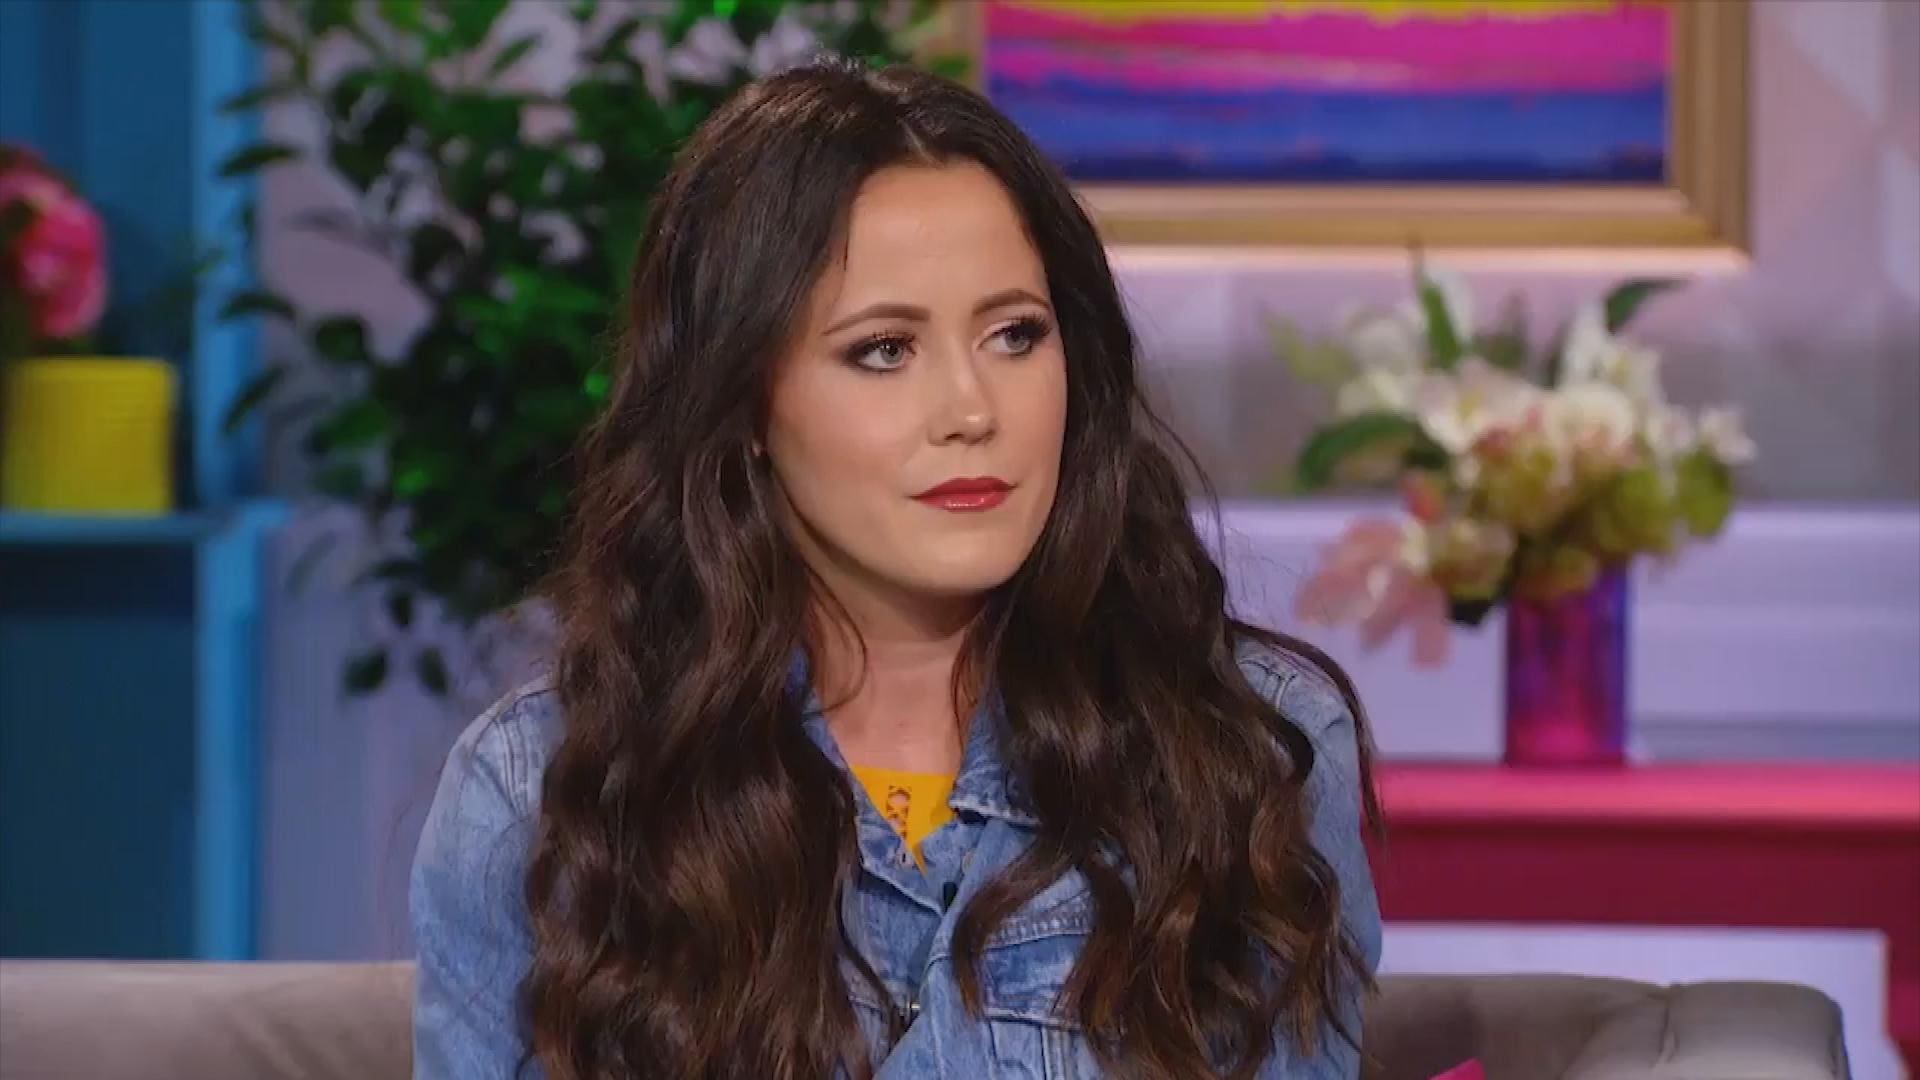 ”jenelle-evans-says-she-will-do-anything-to-have-her-kids-back-home-but-not-if-that-means-divorcing-david-eason”